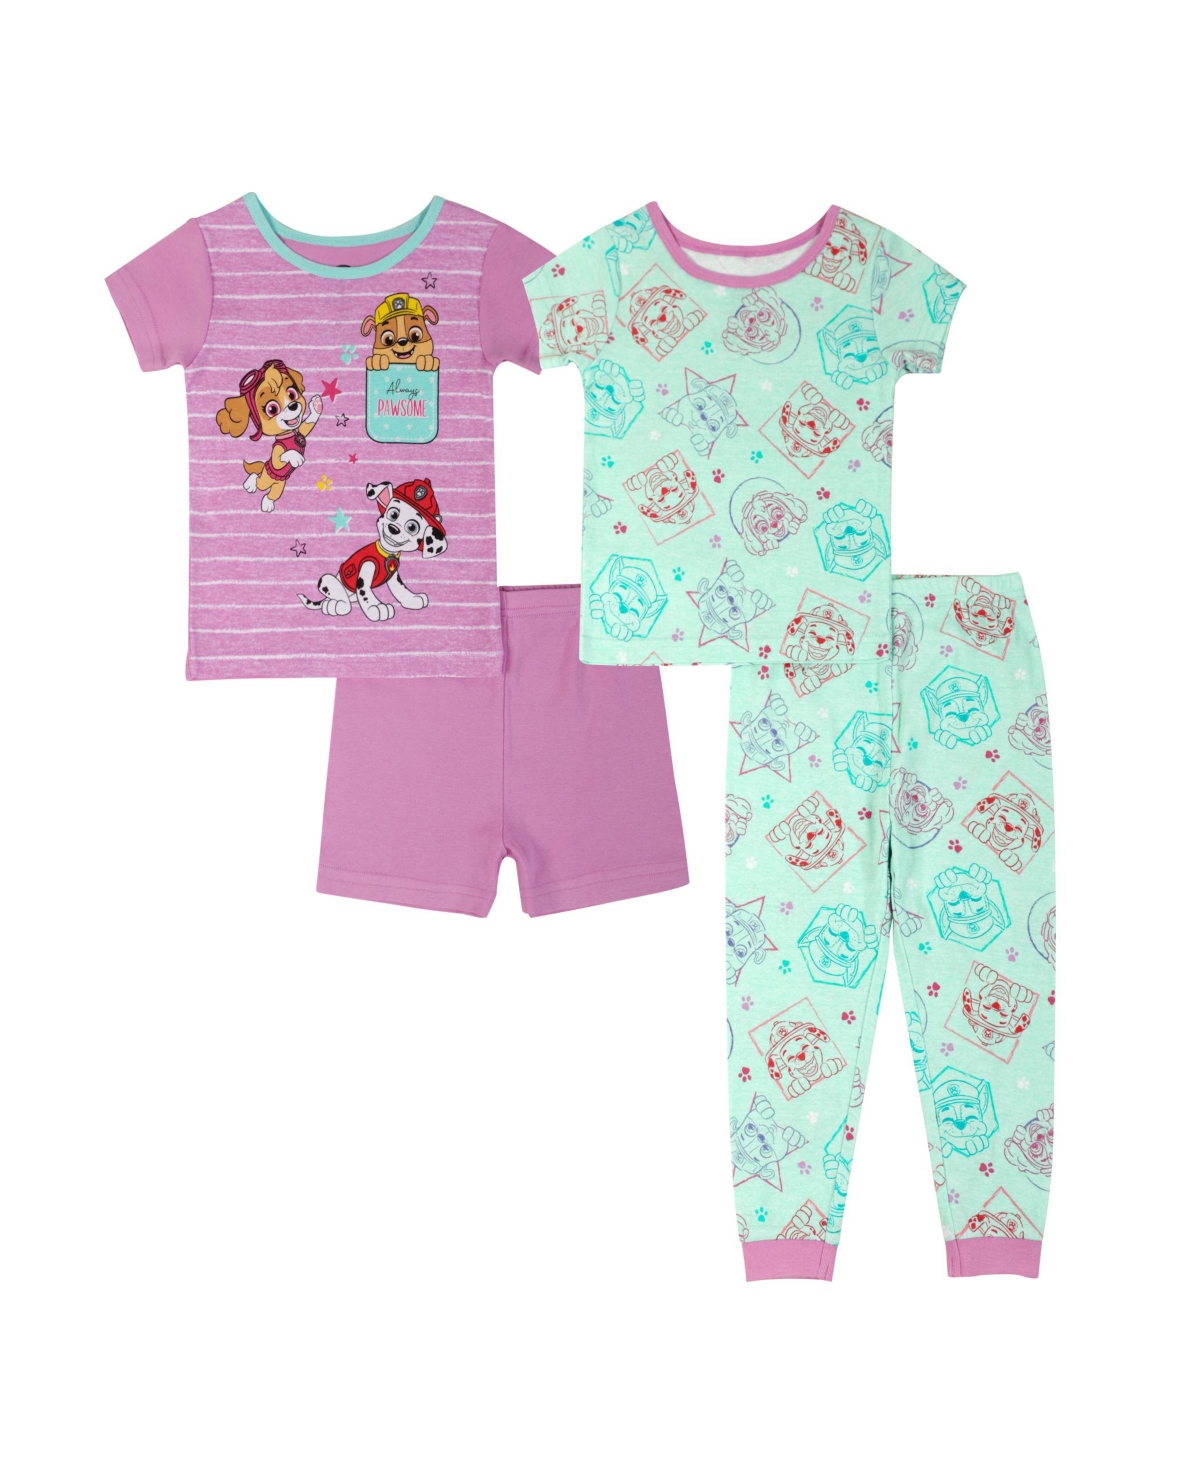 Paw Patrol Toddler Girls Four Piece Set In Assorted